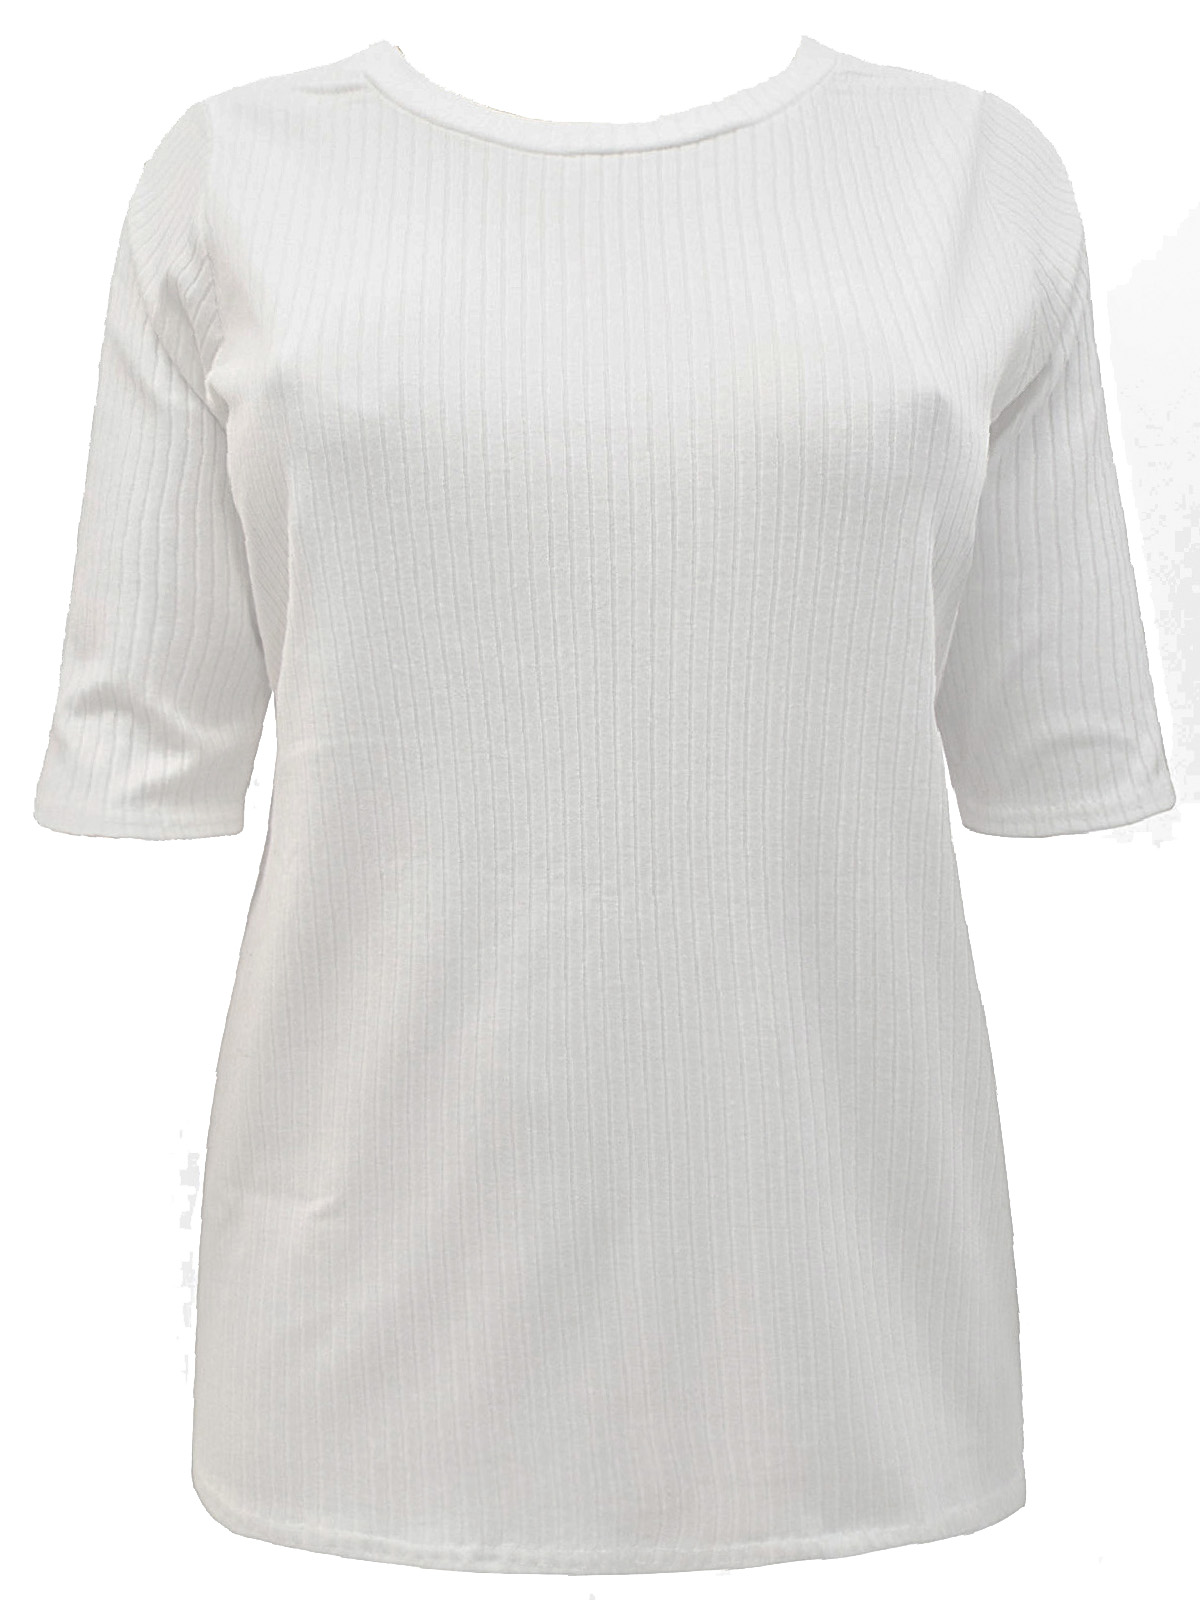 CURVE - - Curve WHITE Ribbed Half Sleeve Top - Plus Size 16 to 26/28